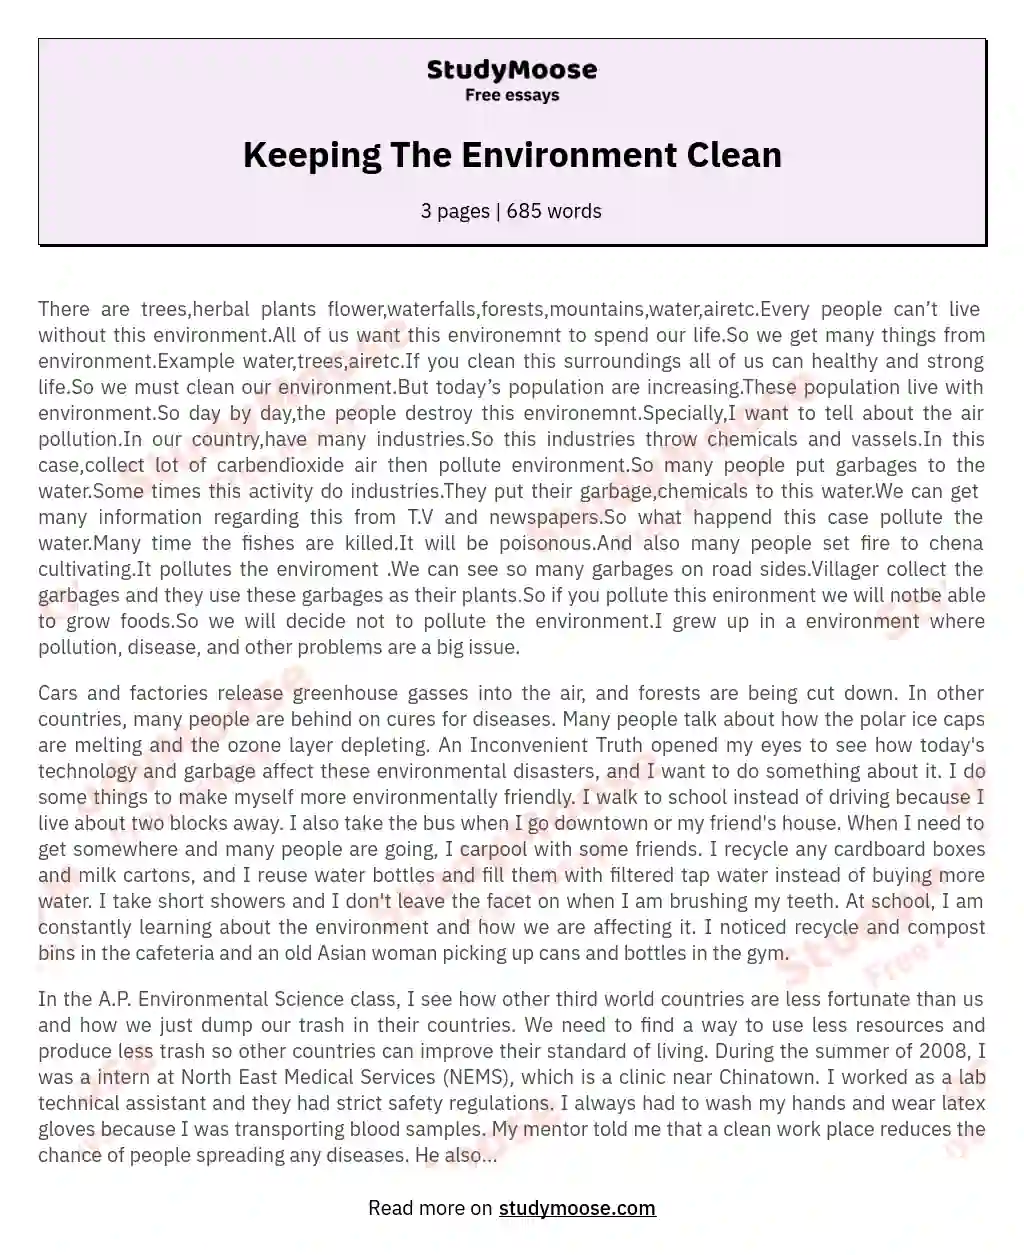 Keeping The Environment Clean essay